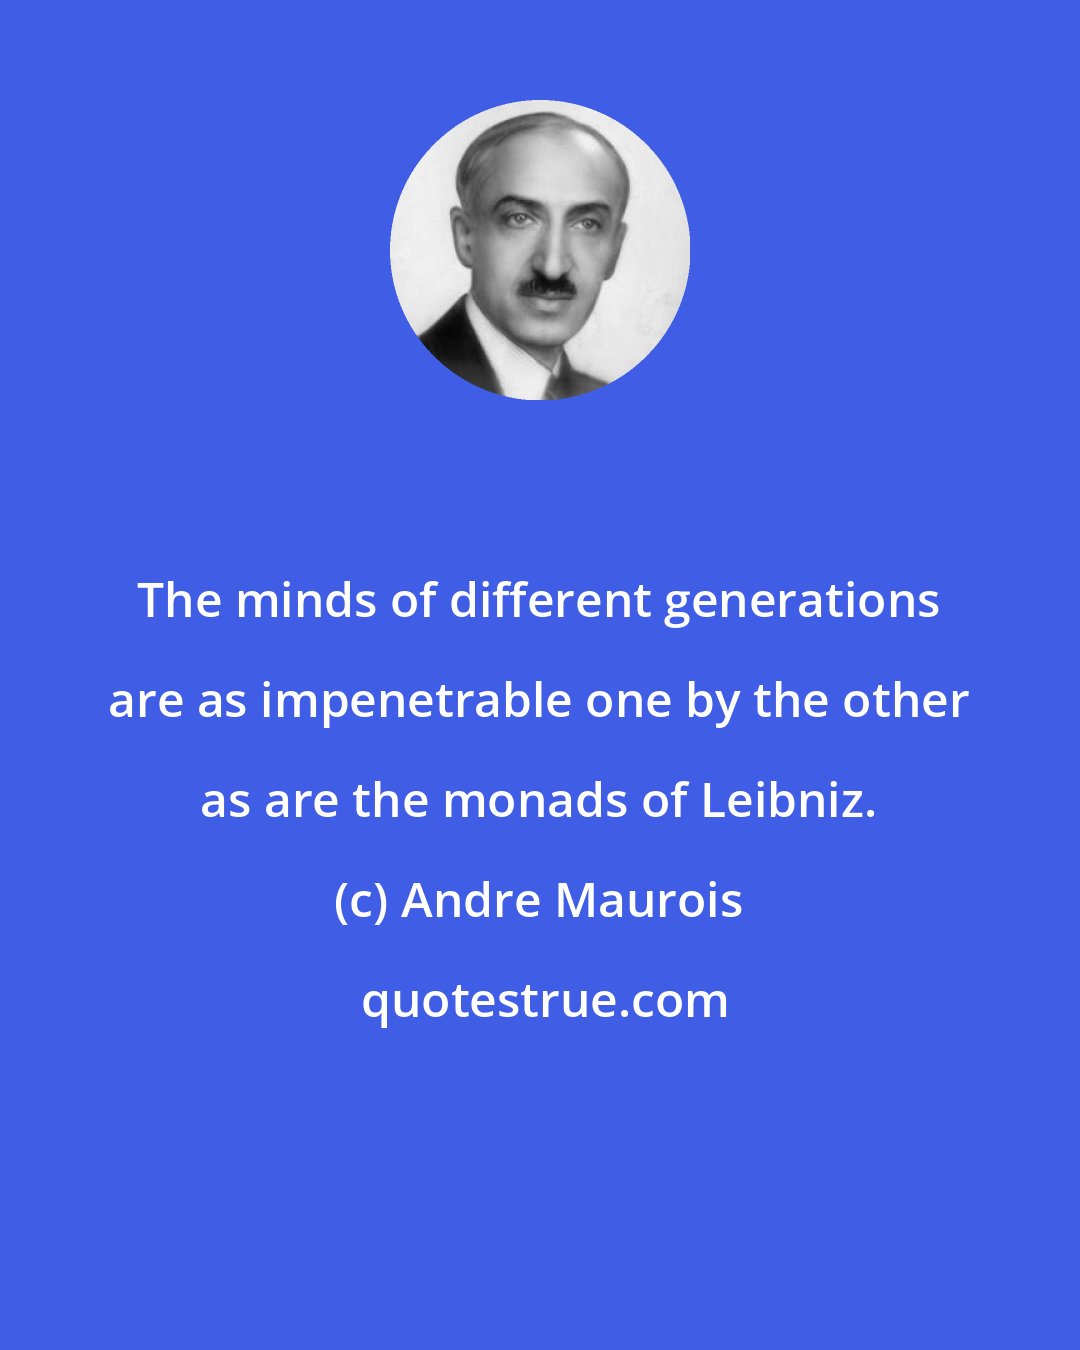 Andre Maurois: The minds of different generations are as impenetrable one by the other as are the monads of Leibniz.